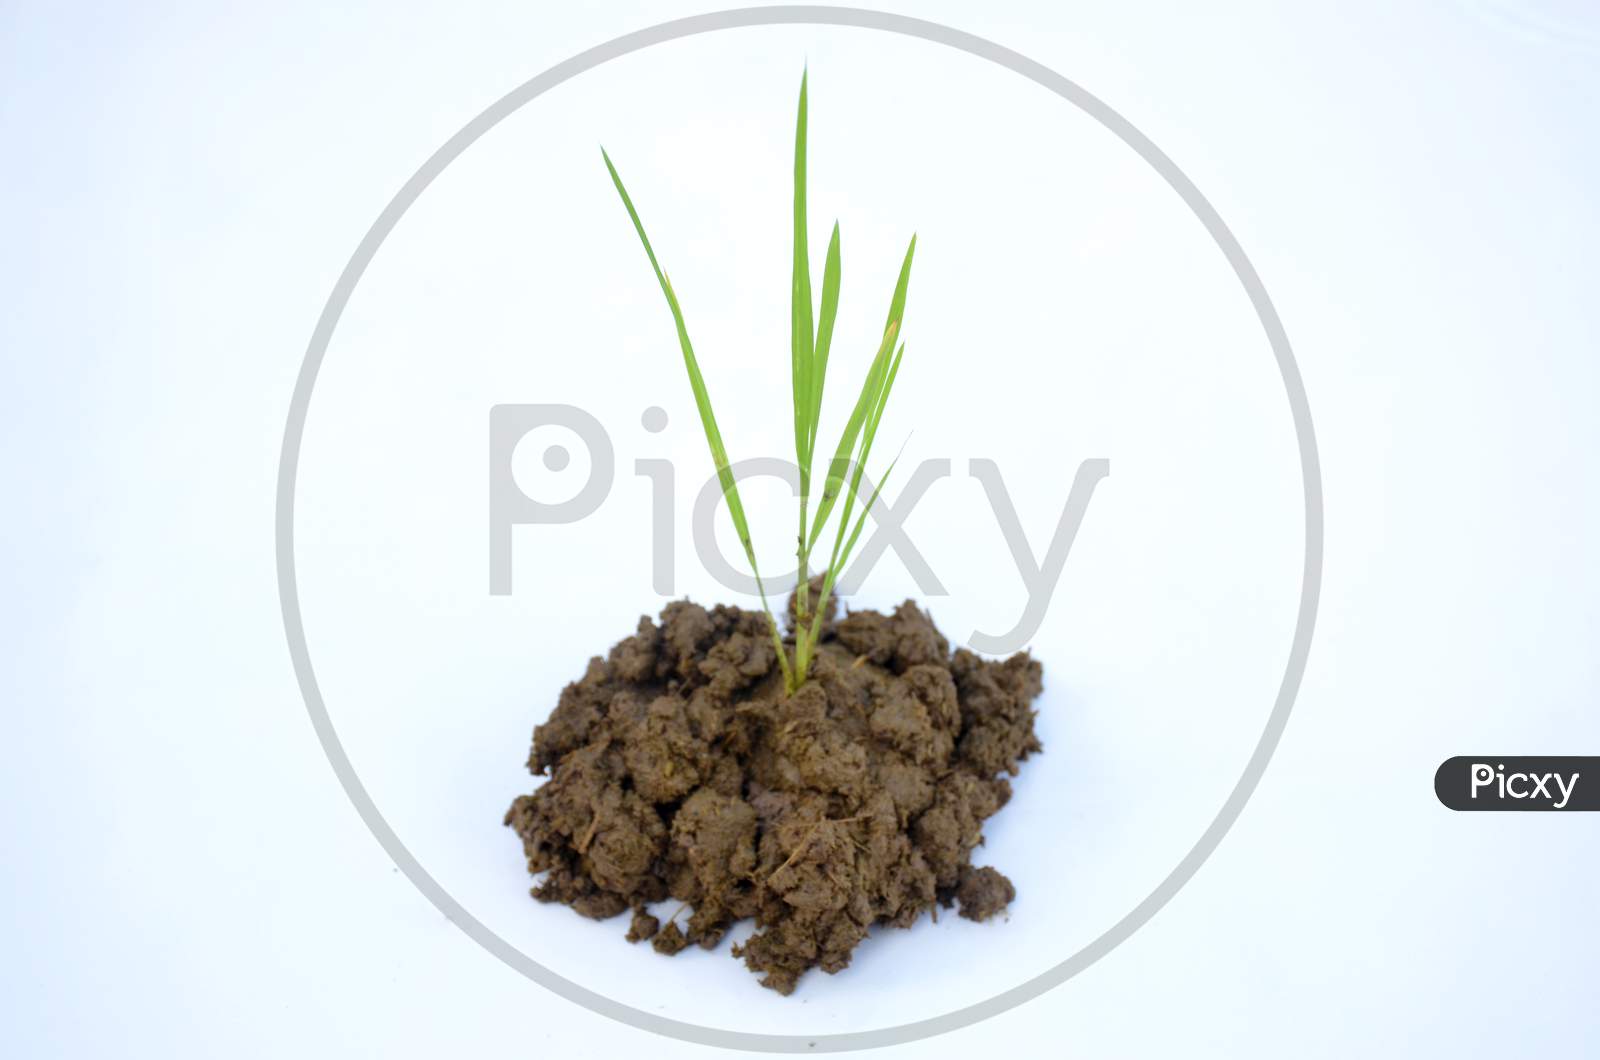 the green paddy plant seedlings isolated on white background.